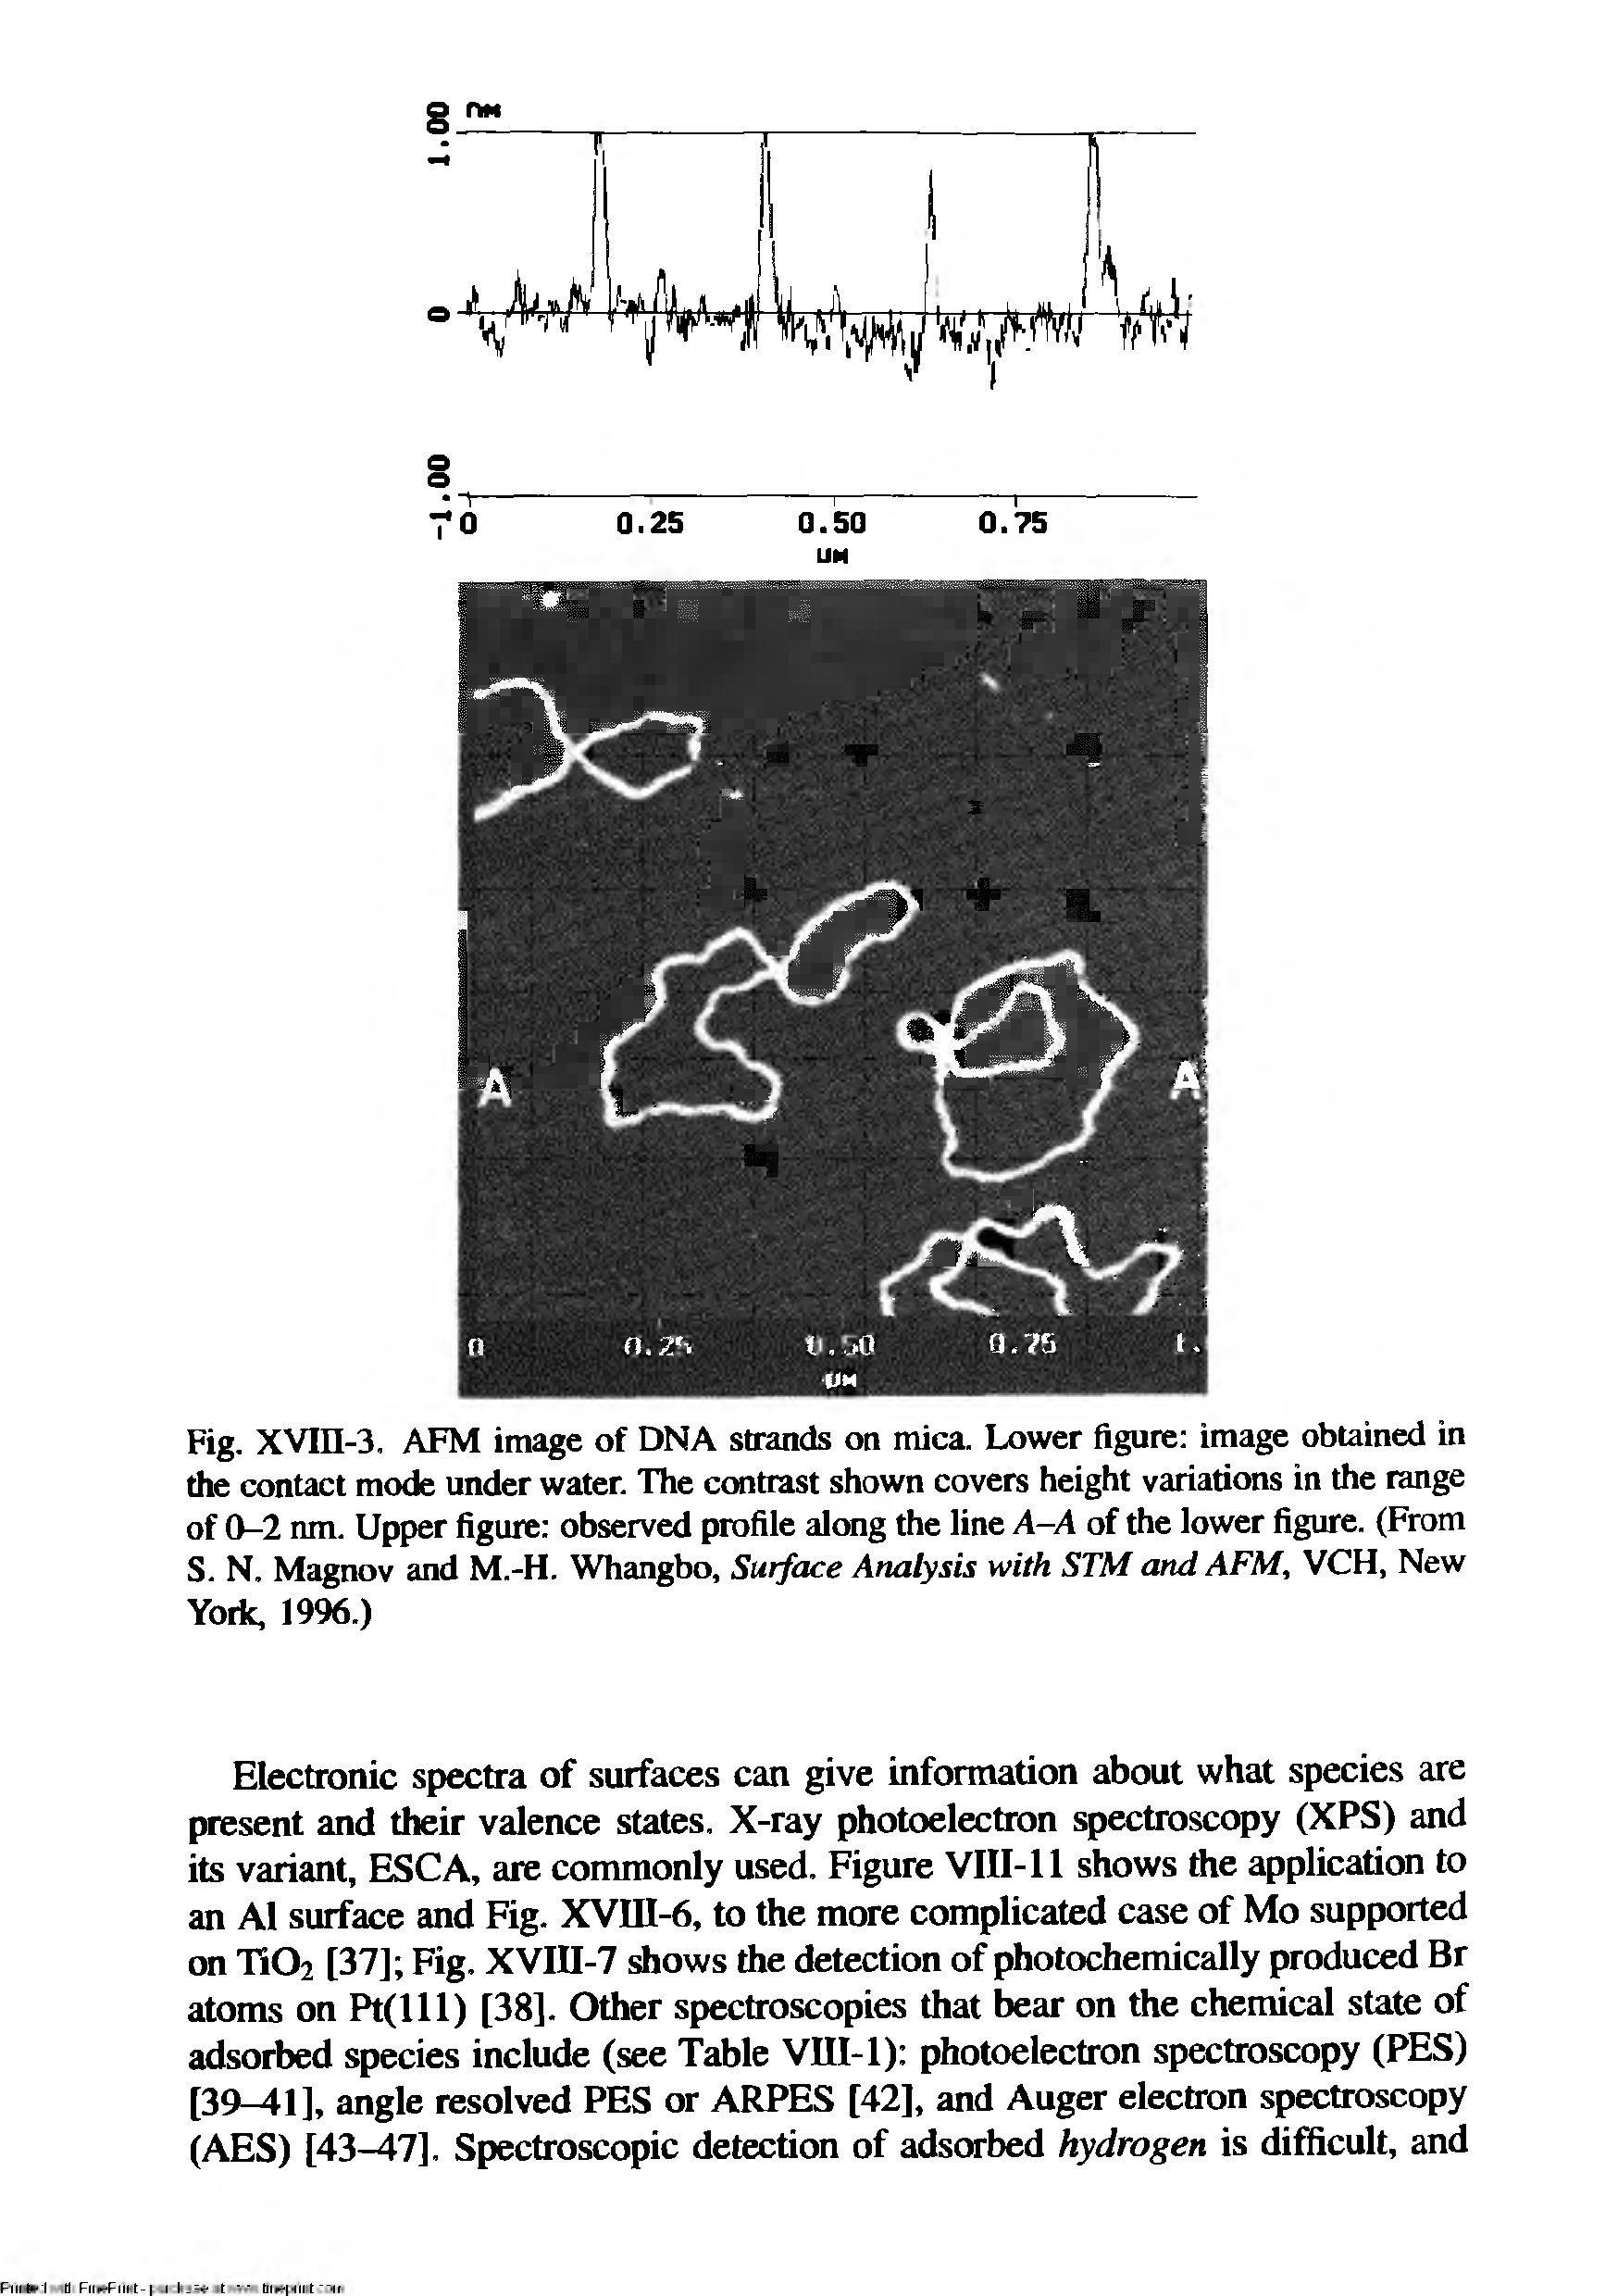 Fig. XVin-3. AFM image of DNA strands on mica. Lower figure image obtained in the contact mode under water. The contrast shown covers height variations in the range of 0-2 nm. Upper figure observed profile along the line A-A of the lower figure. (From S. N. Magnov and M.-H. Whangbo, Surface Analysis with STM and AFM, VCH, New Yoric, 1996.)...